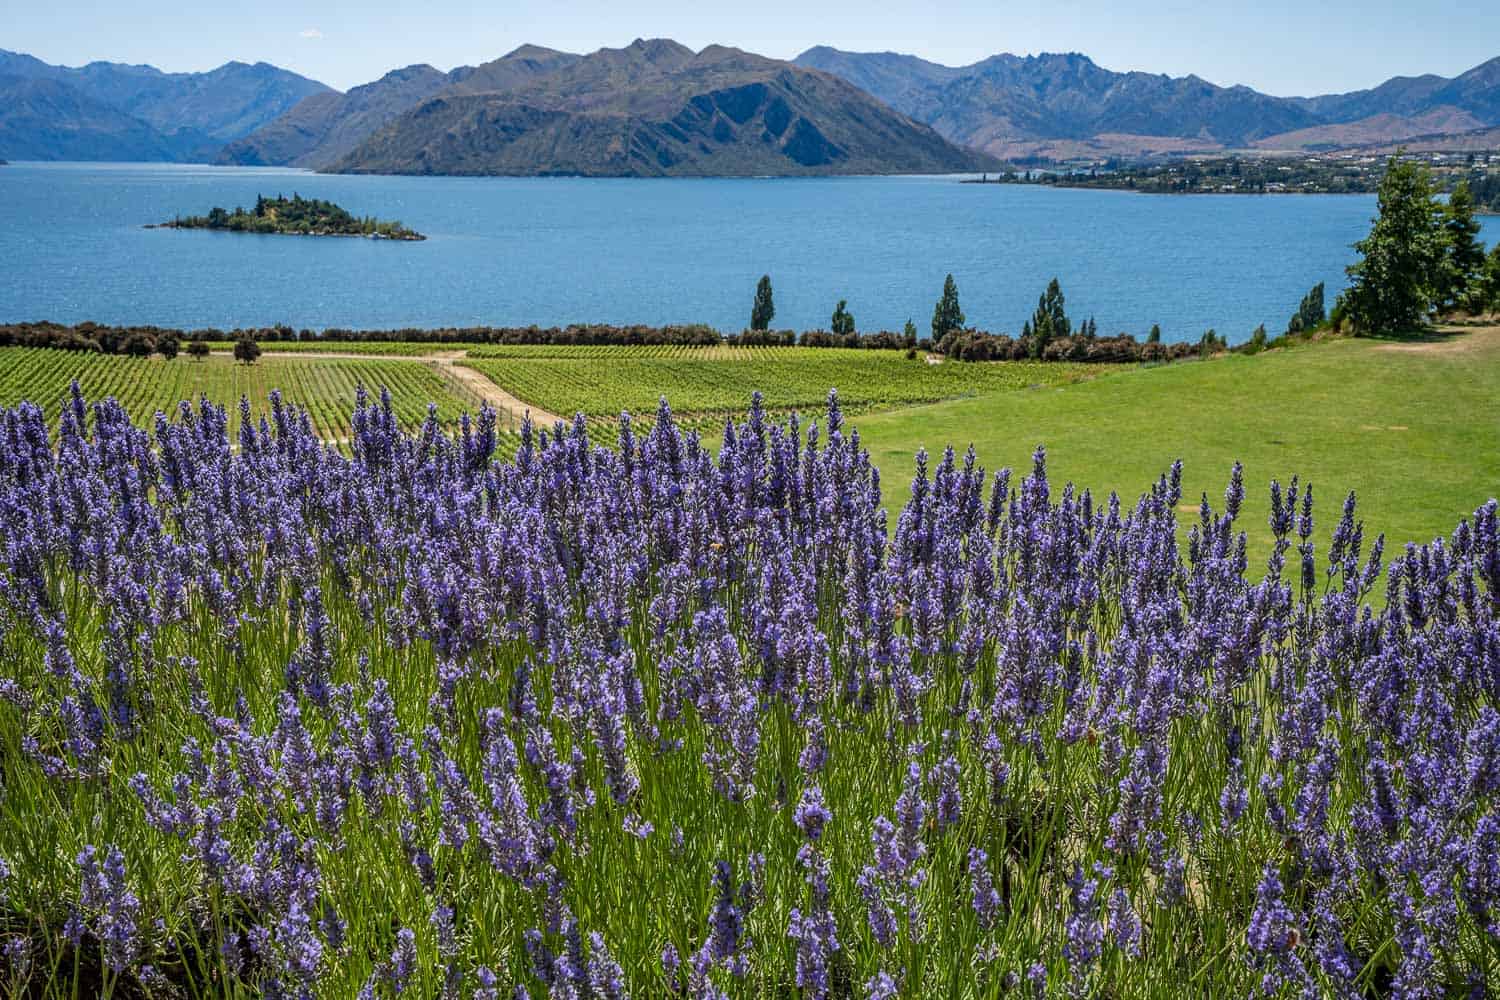 The view from Rippon Winery of lavender, vines and Lake Wanaka